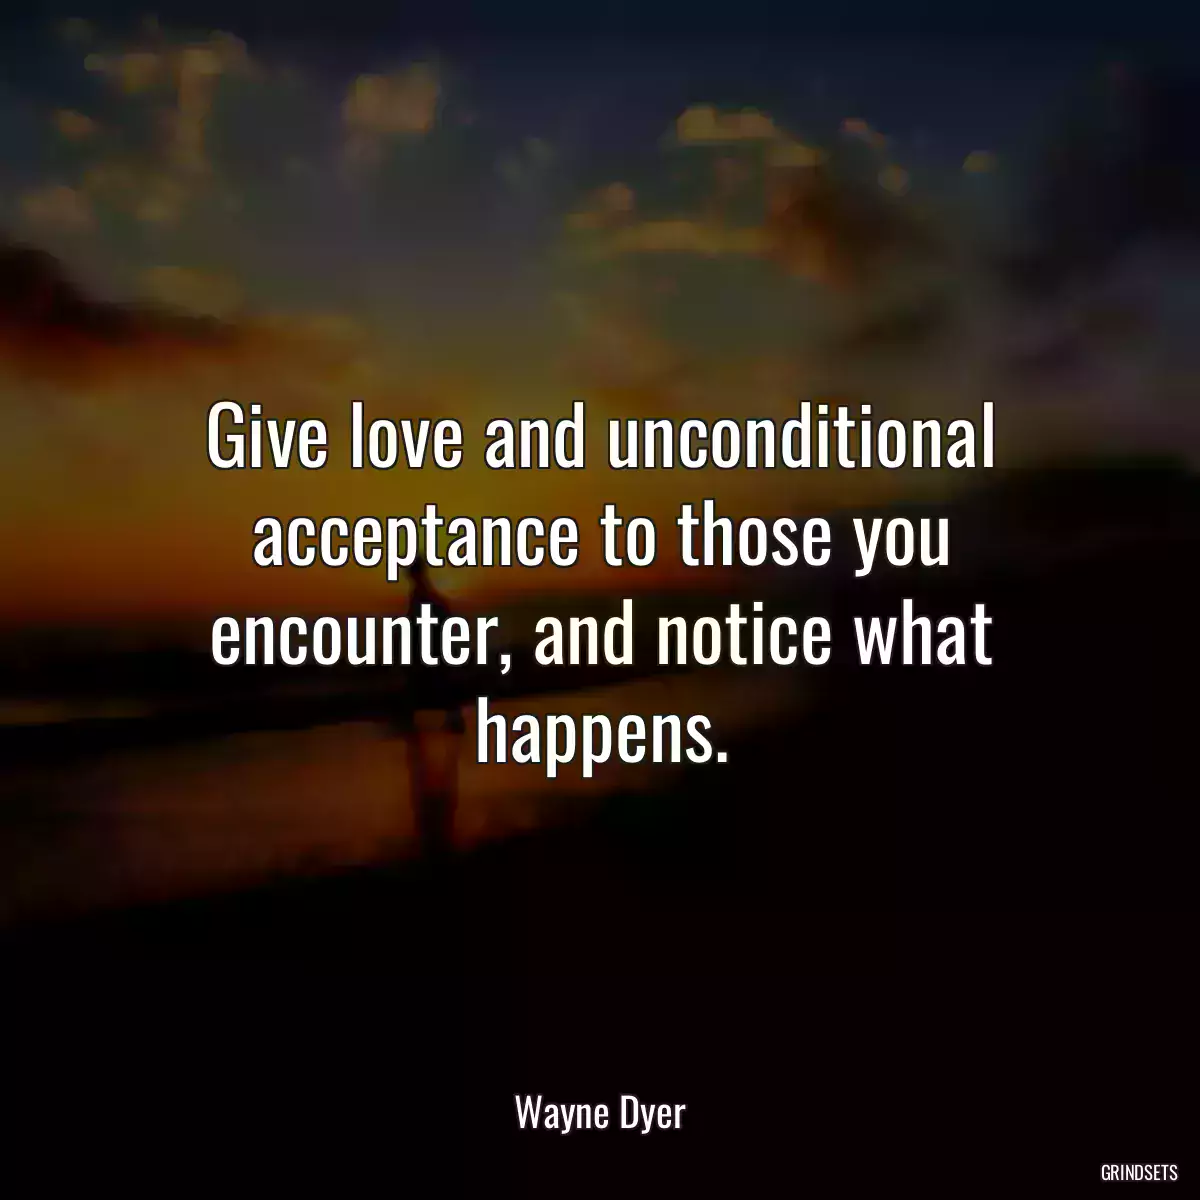 Give love and unconditional acceptance to those you encounter, and notice what happens.